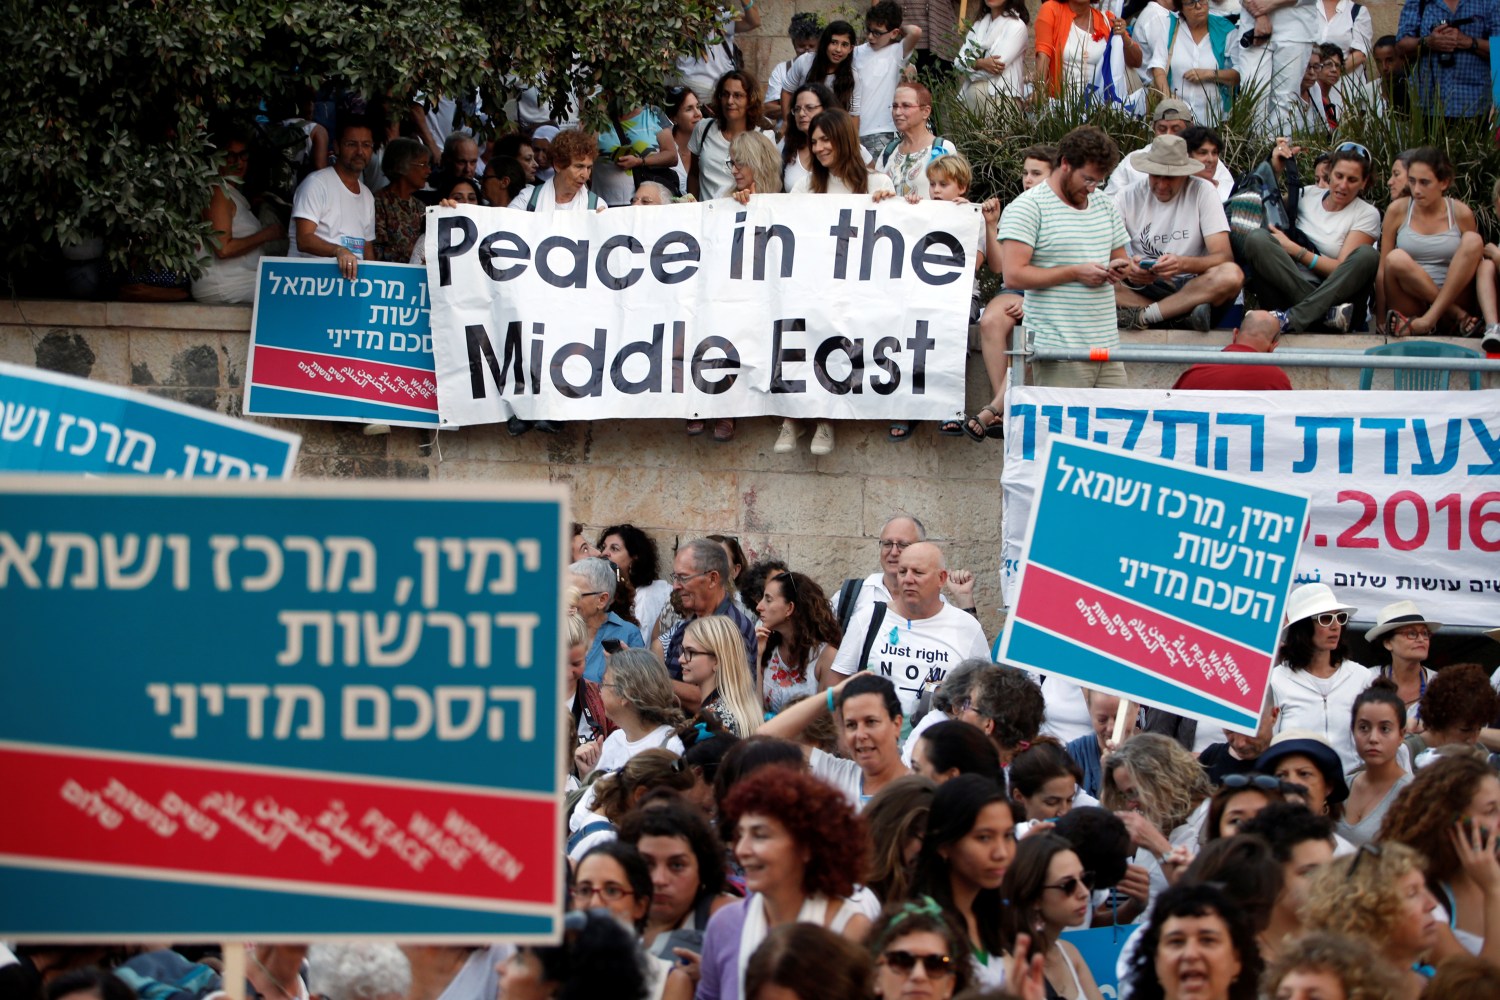 People take part in a rally, the closing event of the March of Hope, a 2-week-long event organised by Women Wage Peace, a non-political movement calling for a peaceful solution to the Israeli-Palestinian conflict and women's participation in such a solution, outside Israeli Prime Minister Benjamin Netanyahu's office in Jerusalem October 19, 2016. REUTERS/Baz Ratner - RTX2PJST